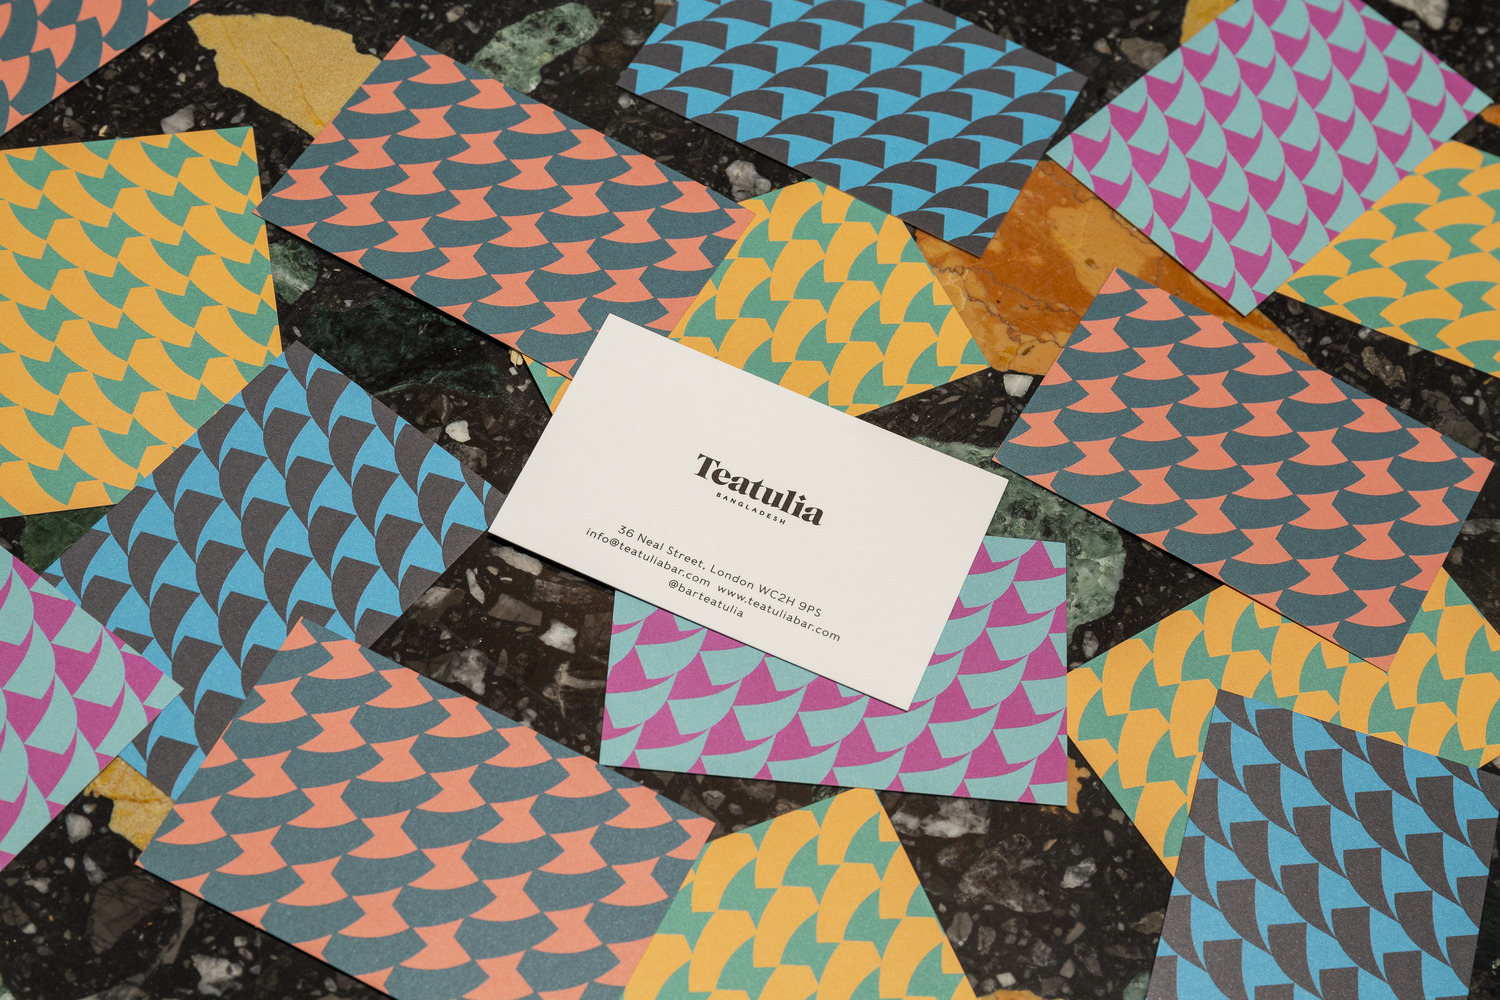 Creative Business Cards – Teatulia by Here Design